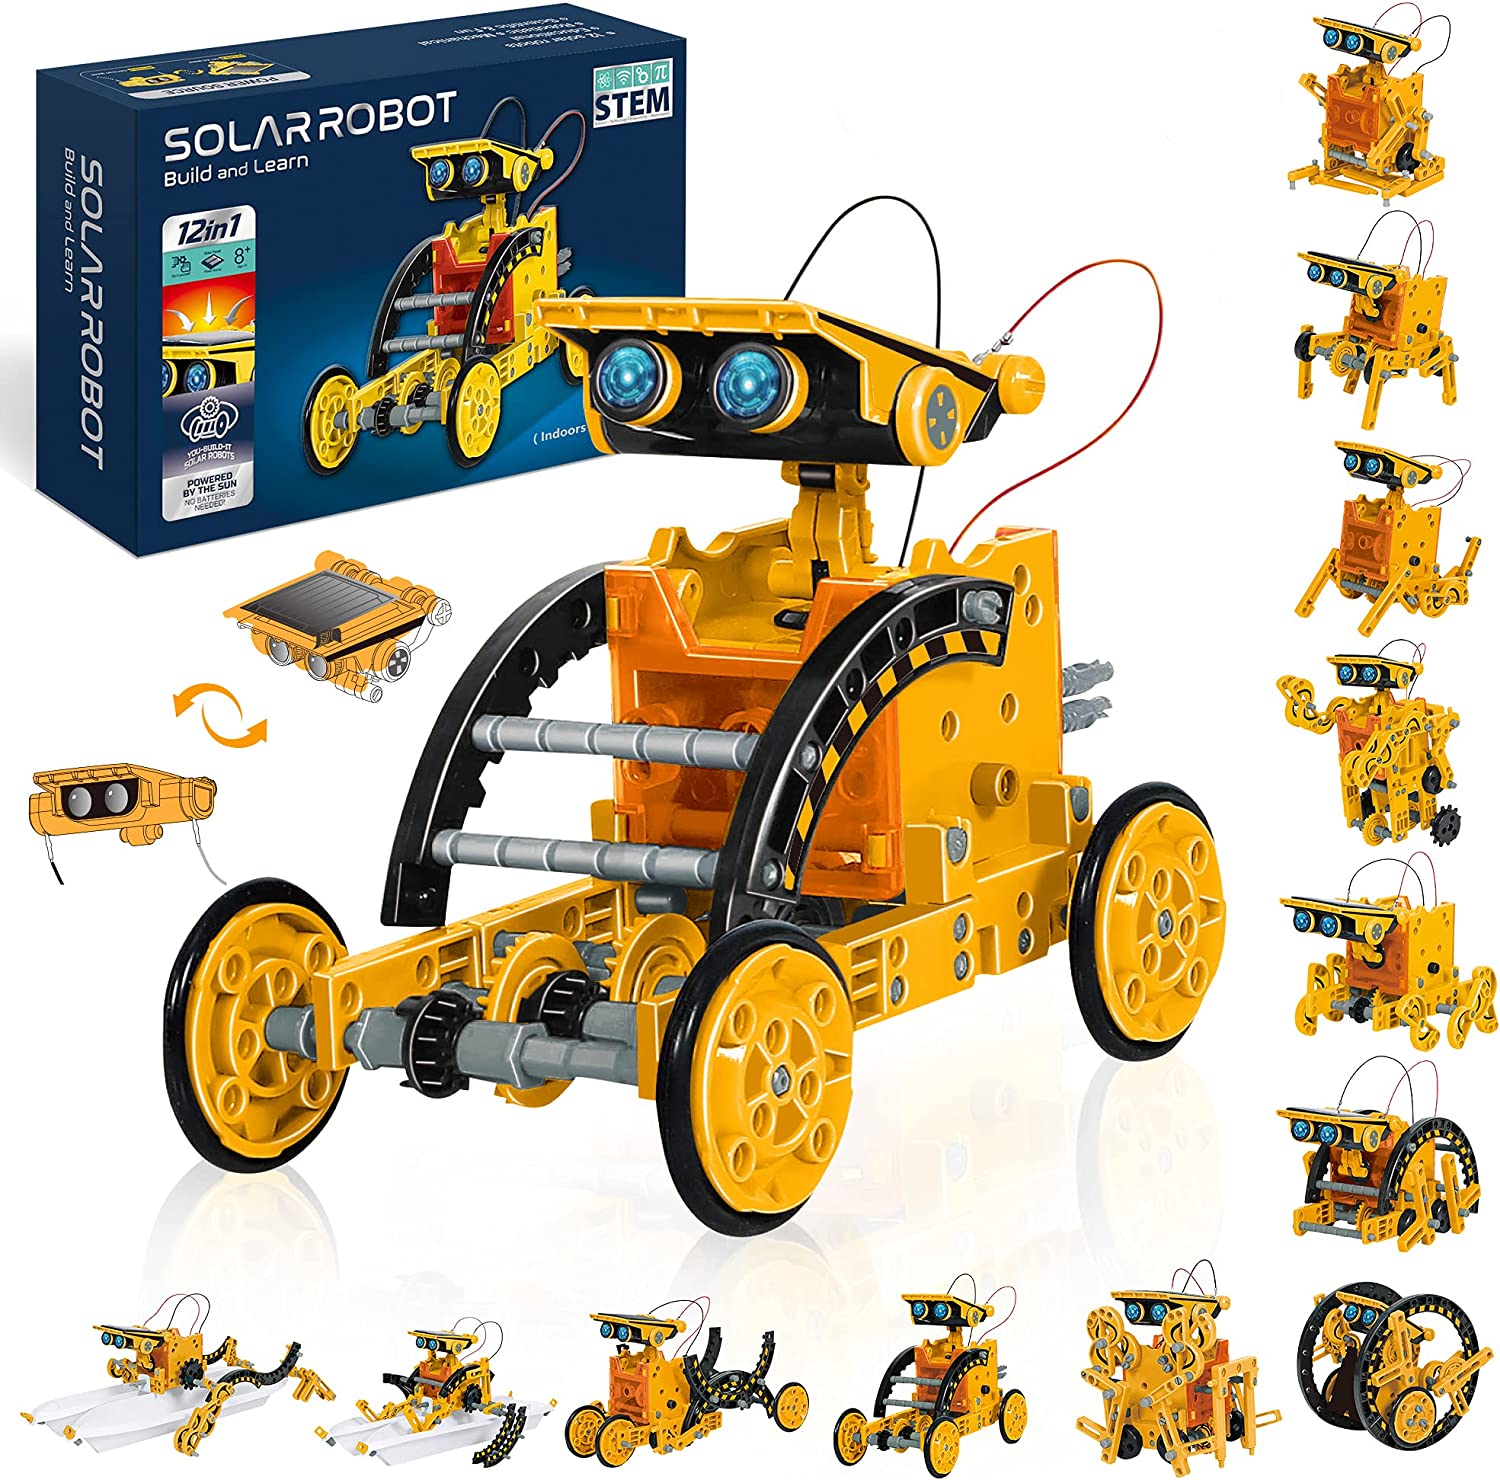 Minto toy Build & Learn Sun-Powered Robot Kit